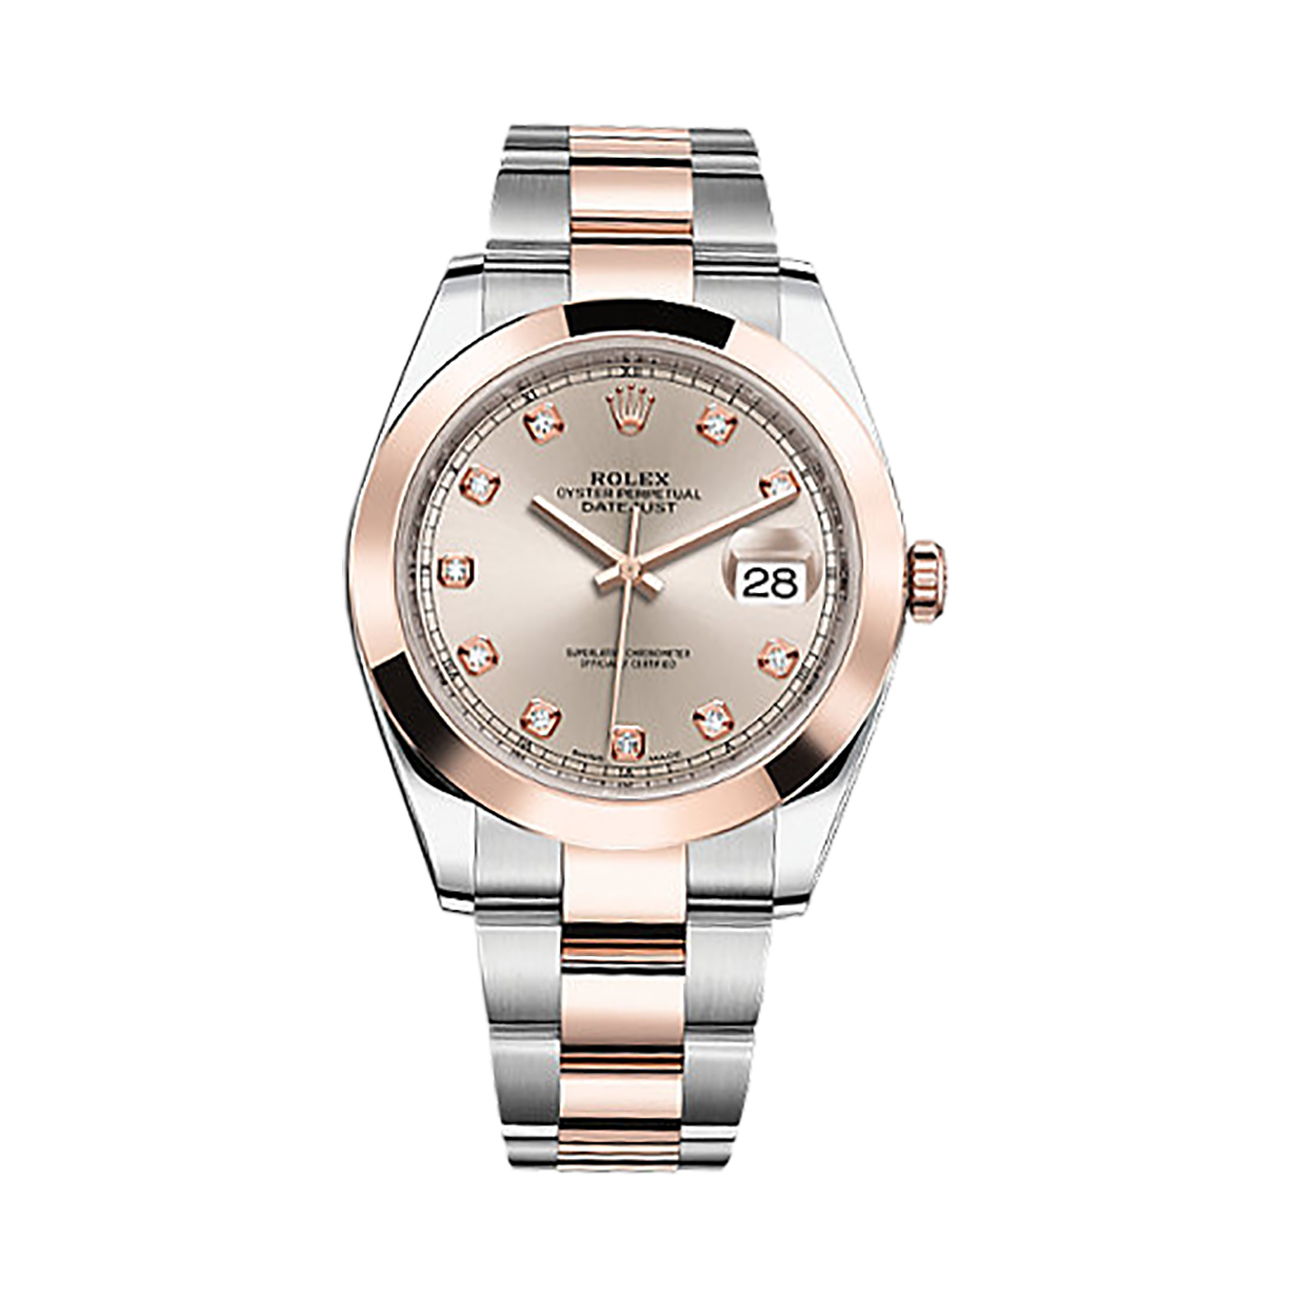 Datejust 41 126301 Rose Gold & Stainless Steel Watch (Sundust Set with Diamonds)